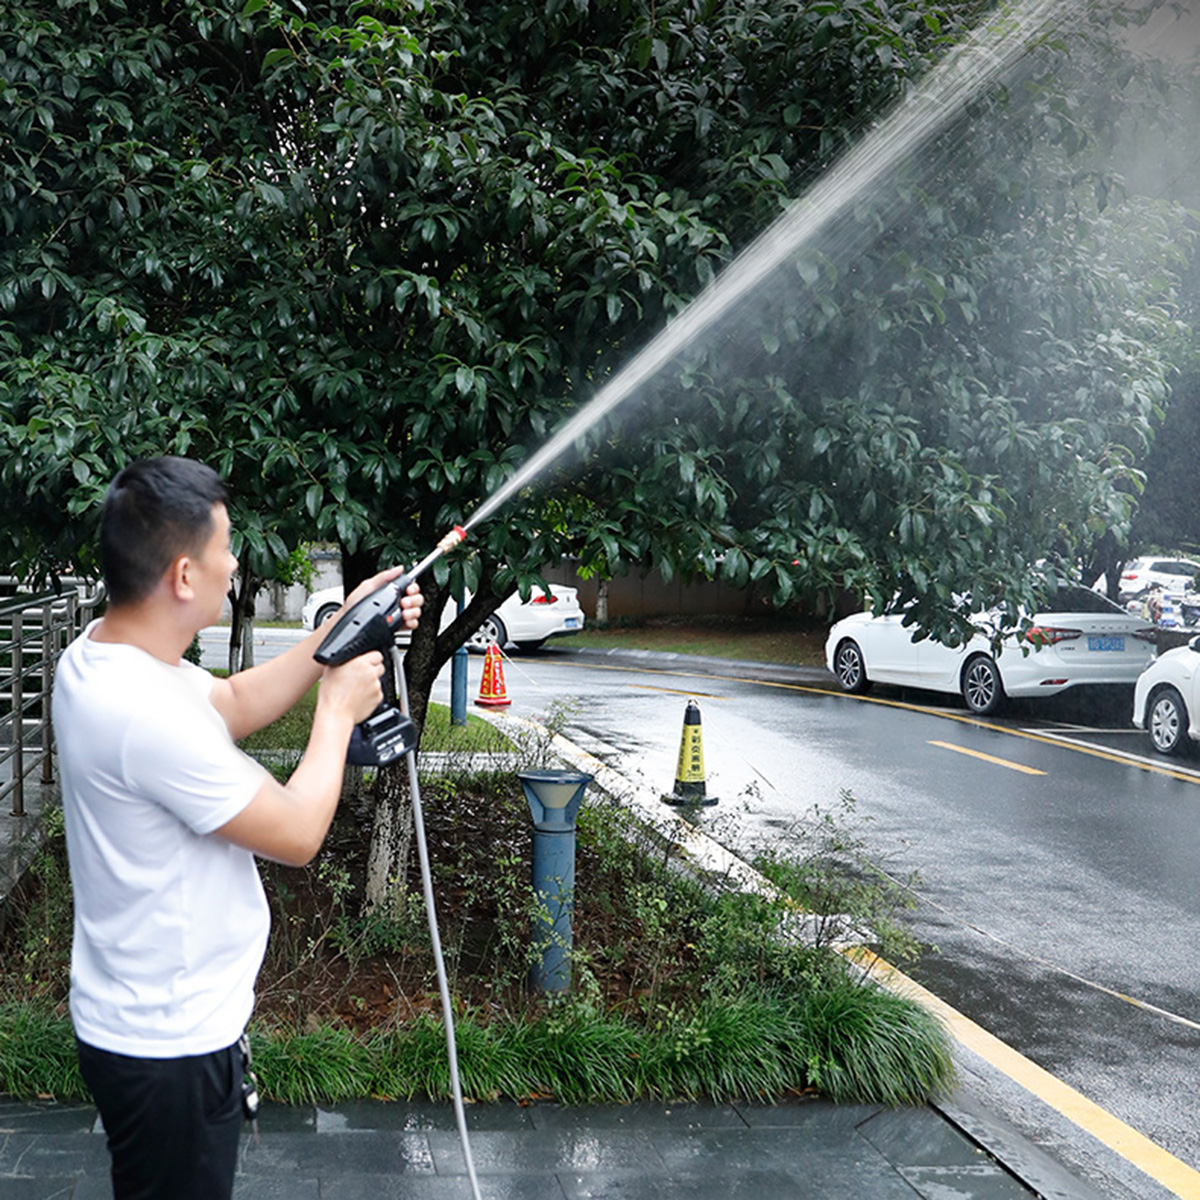 12V-15000mAh-Cordless-Electric-Pressure-Washer-Rechargeable-Car-Washing-Machine-Water-Spray-Guns-W-1-1830643-8